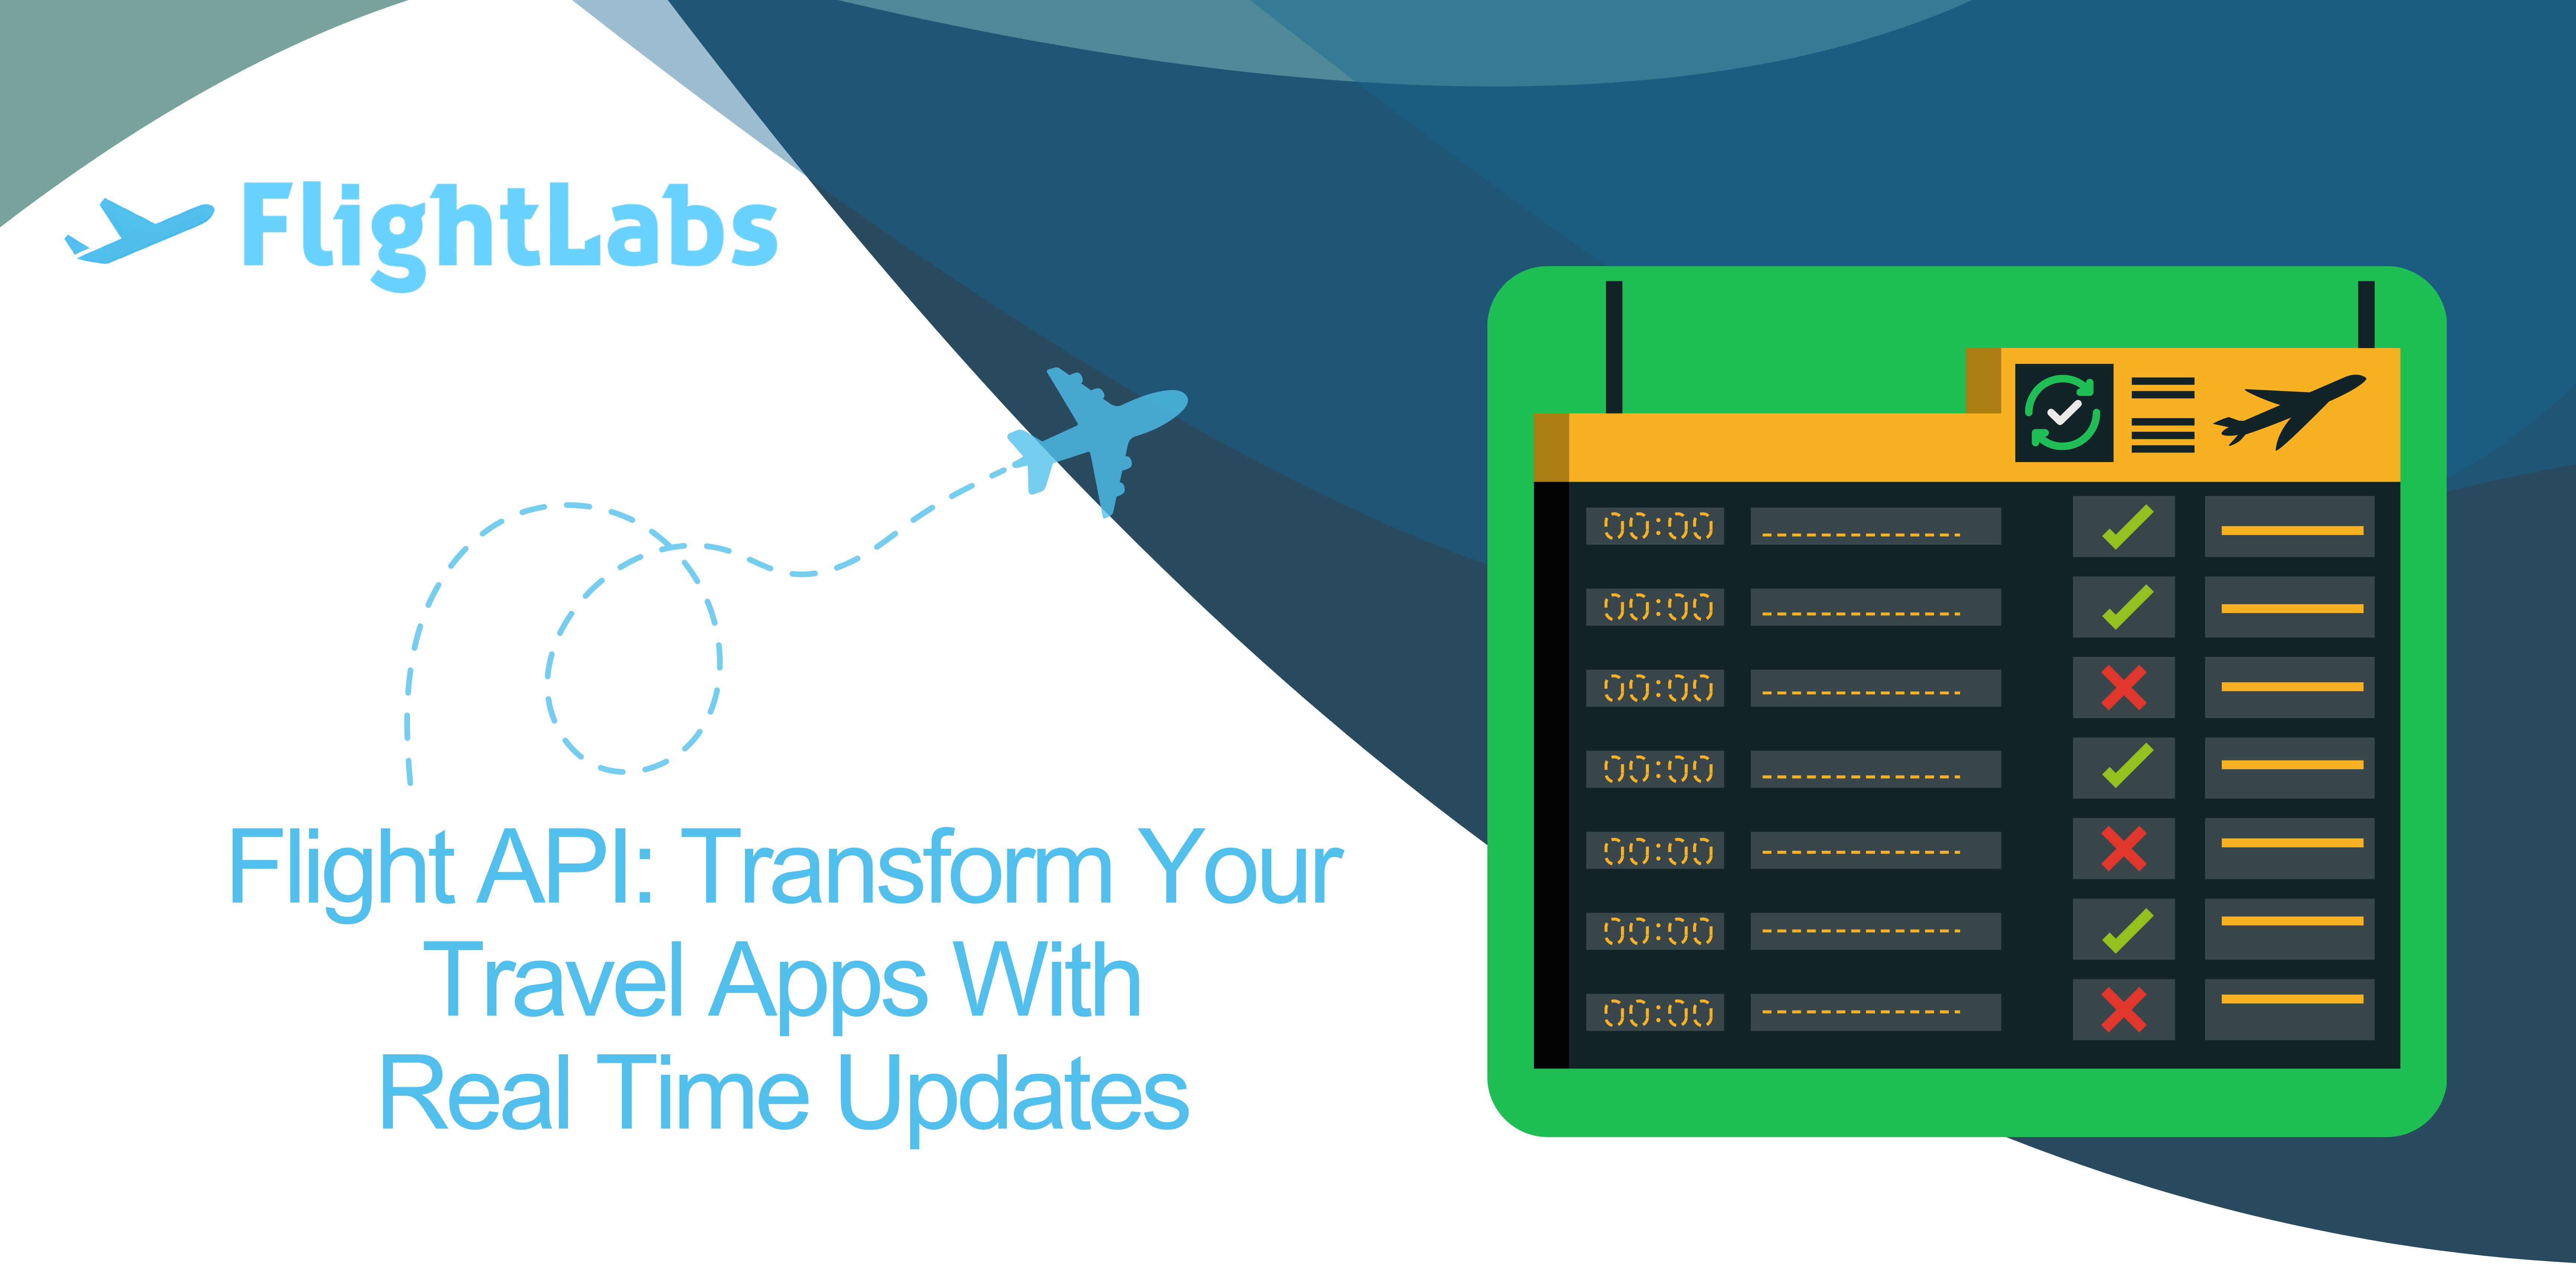 Flight API: Transform Your Travel Apps With Real Time Updates